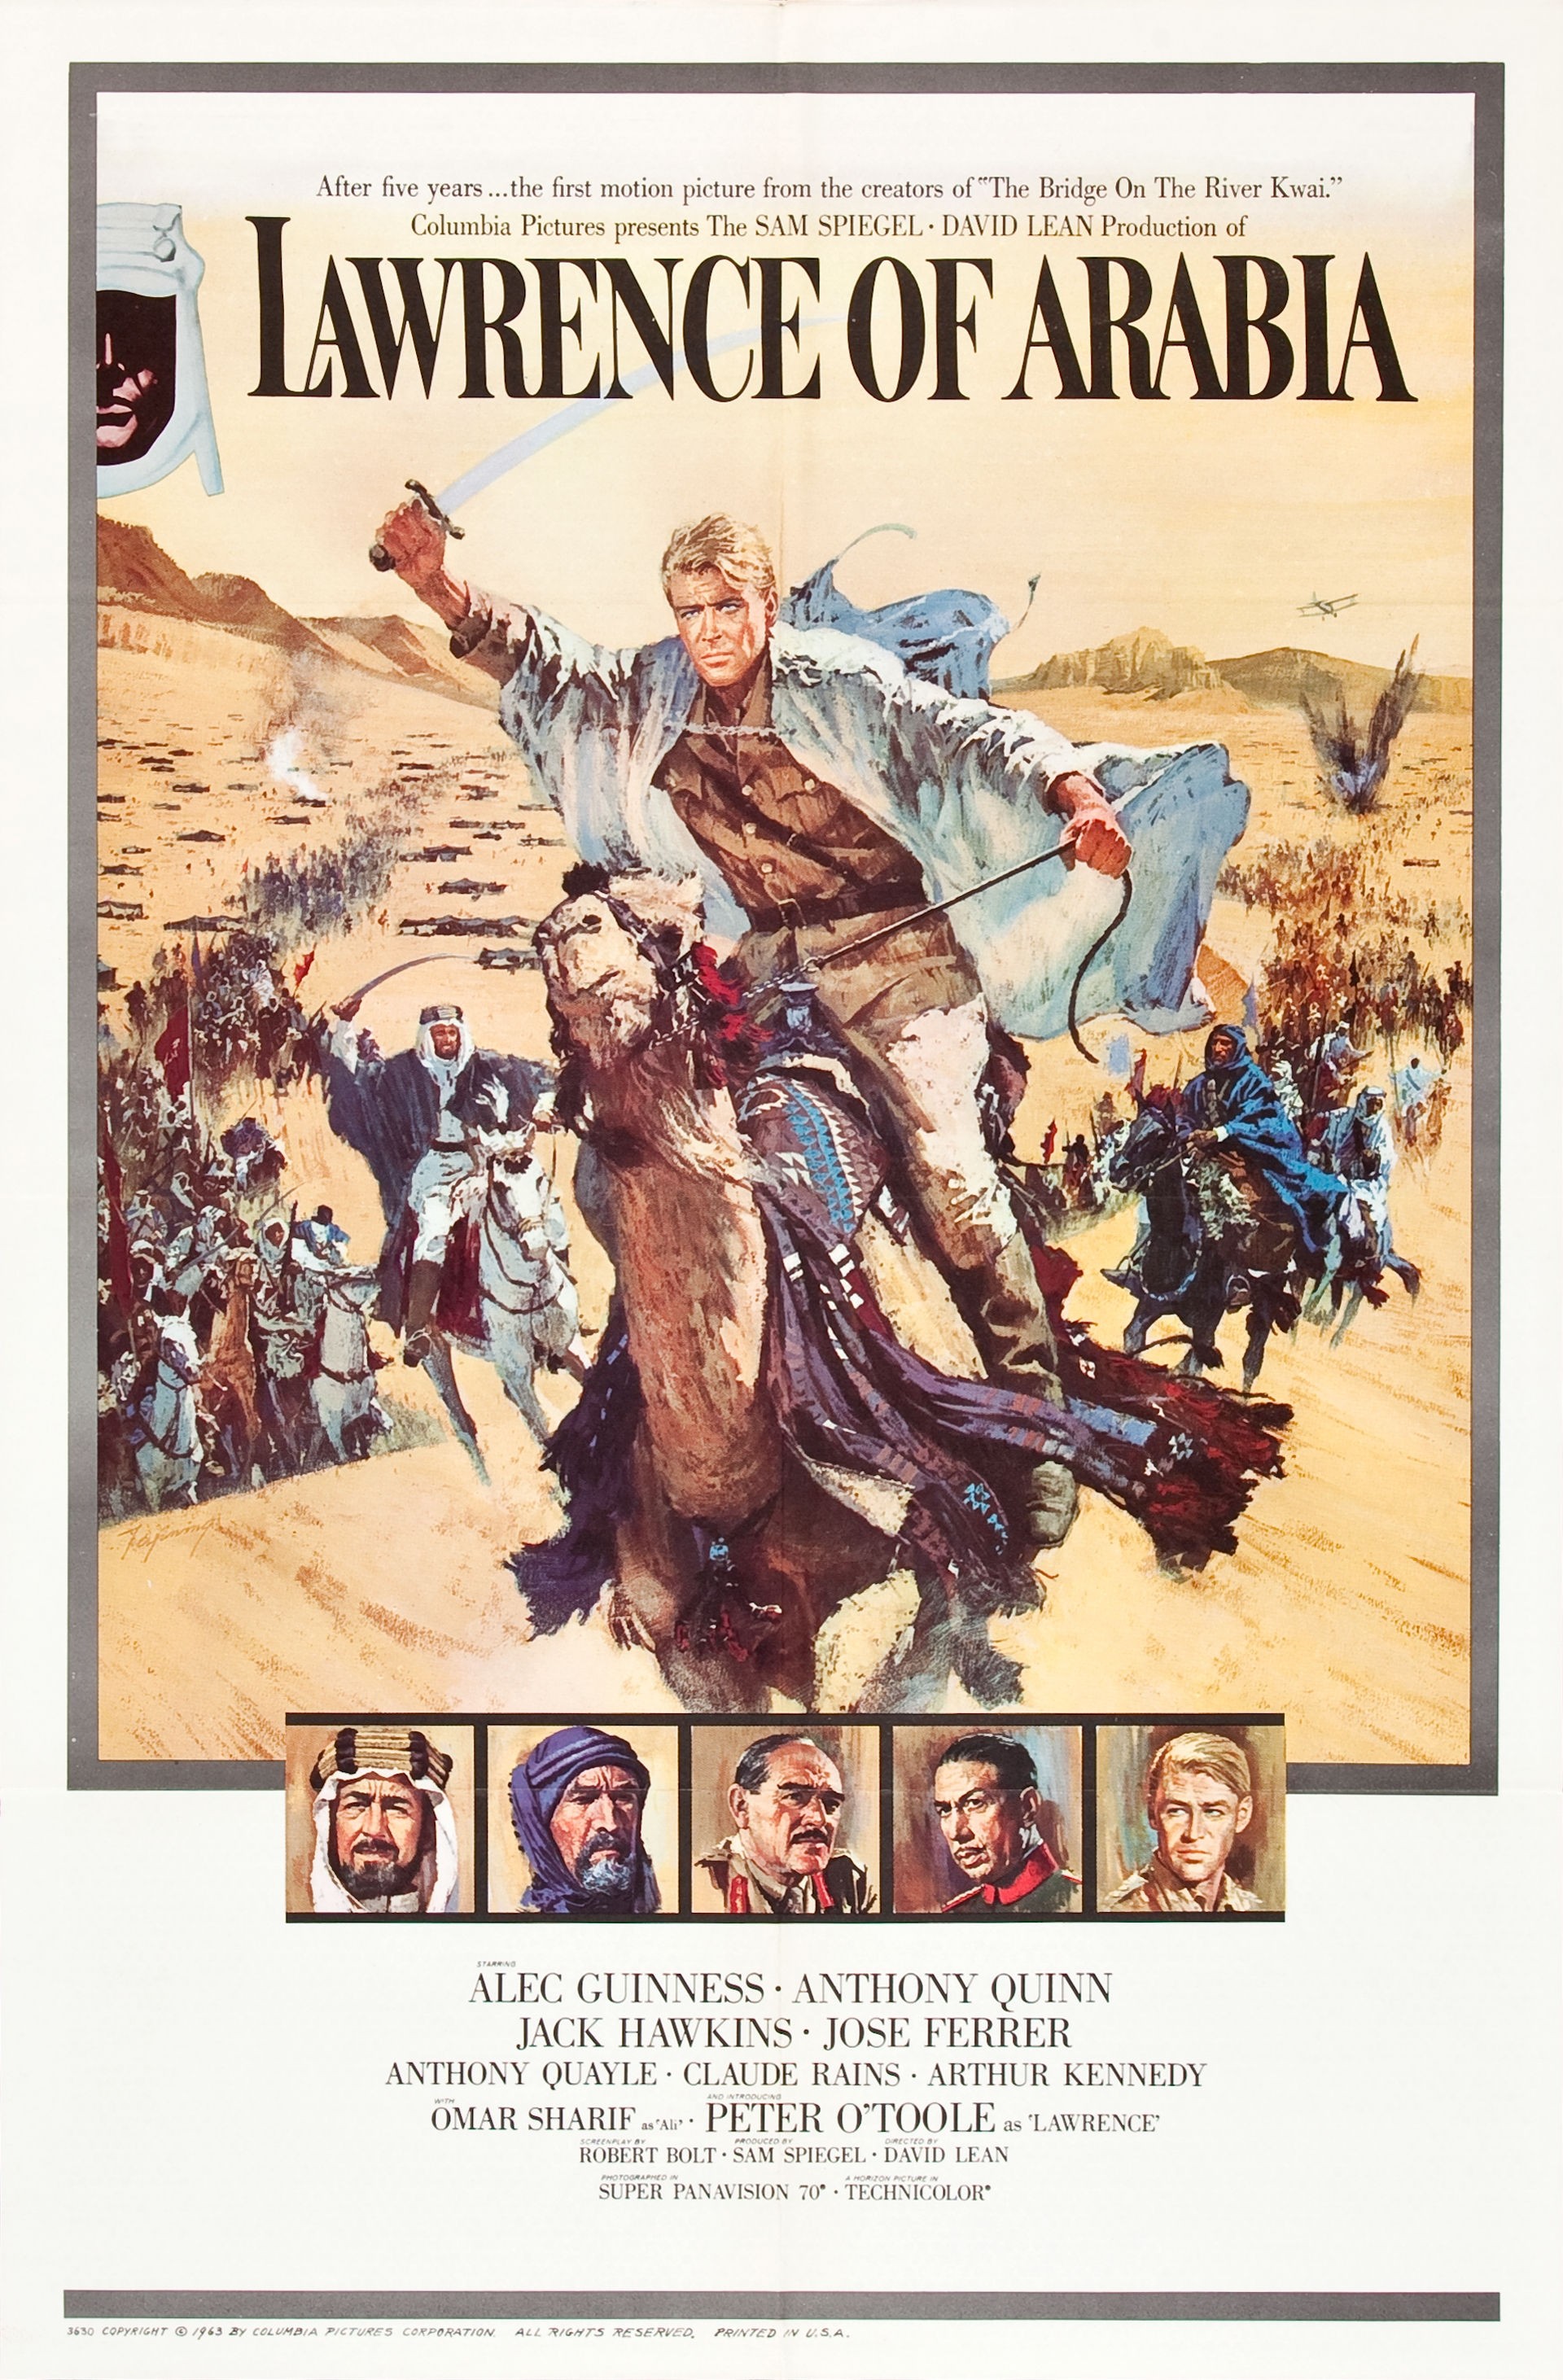 Mega Sized Movie Poster Image for Lawrence of Arabia (#3 of 9)